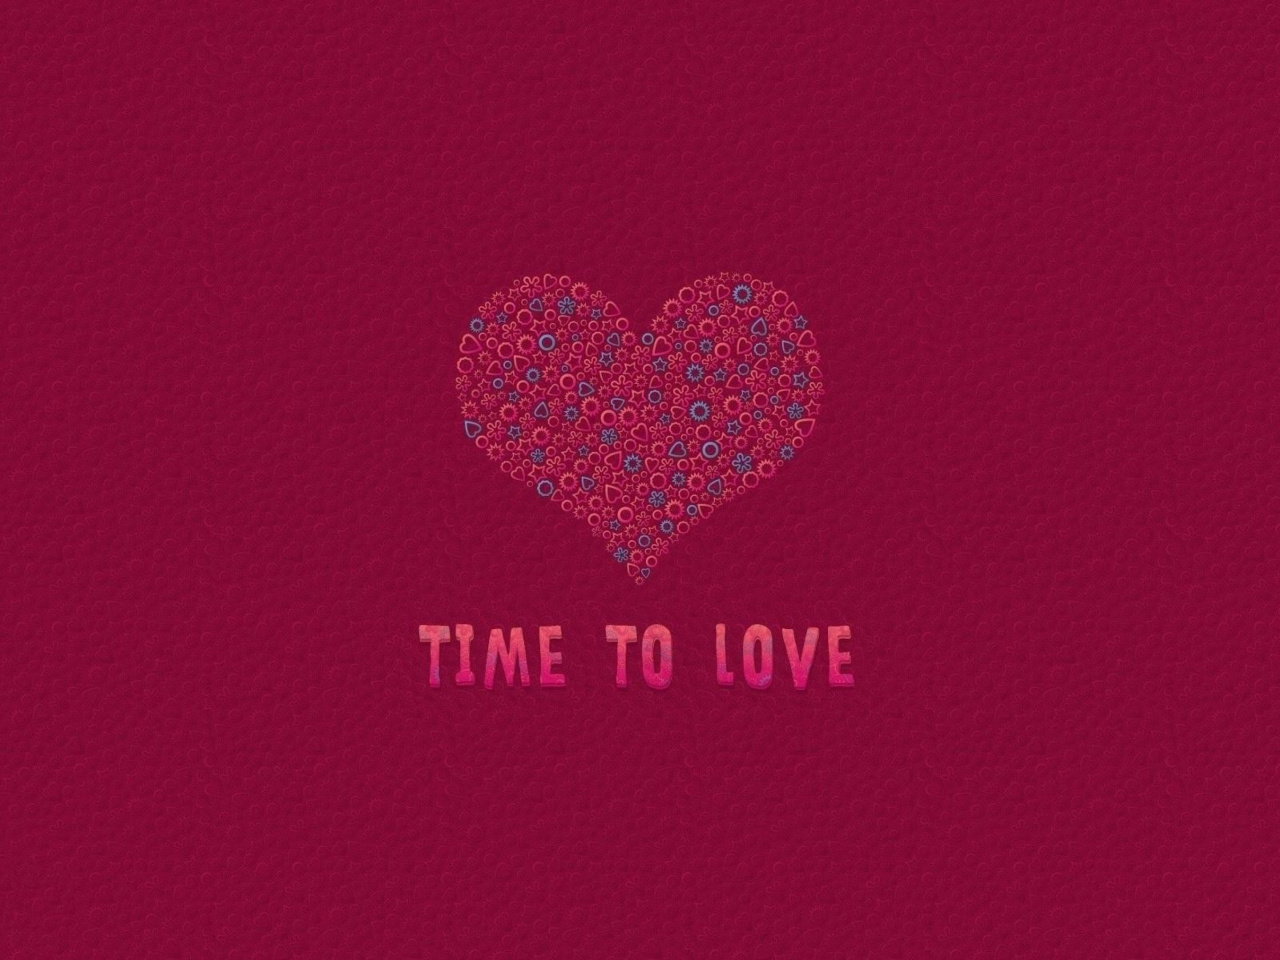 Time to Love wallpaper 1280x960